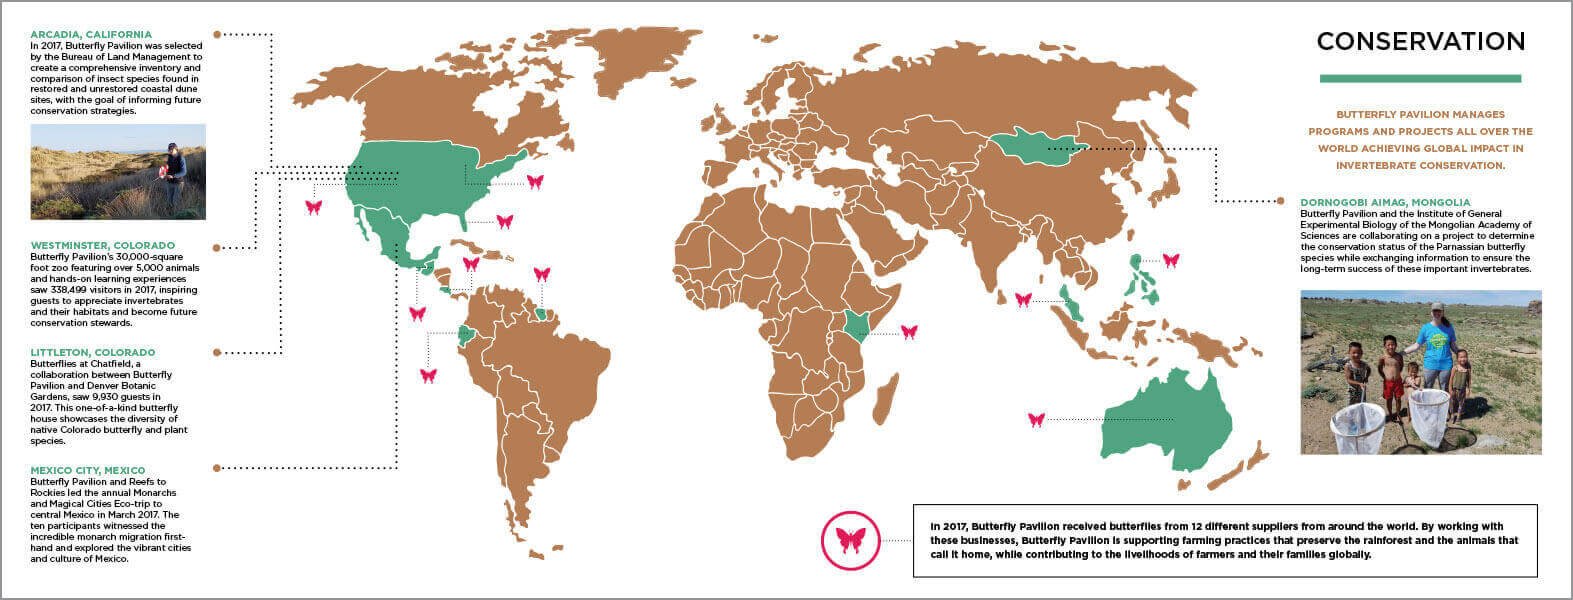 Image of map of the world with butterfly graphics and photos of people doing field work